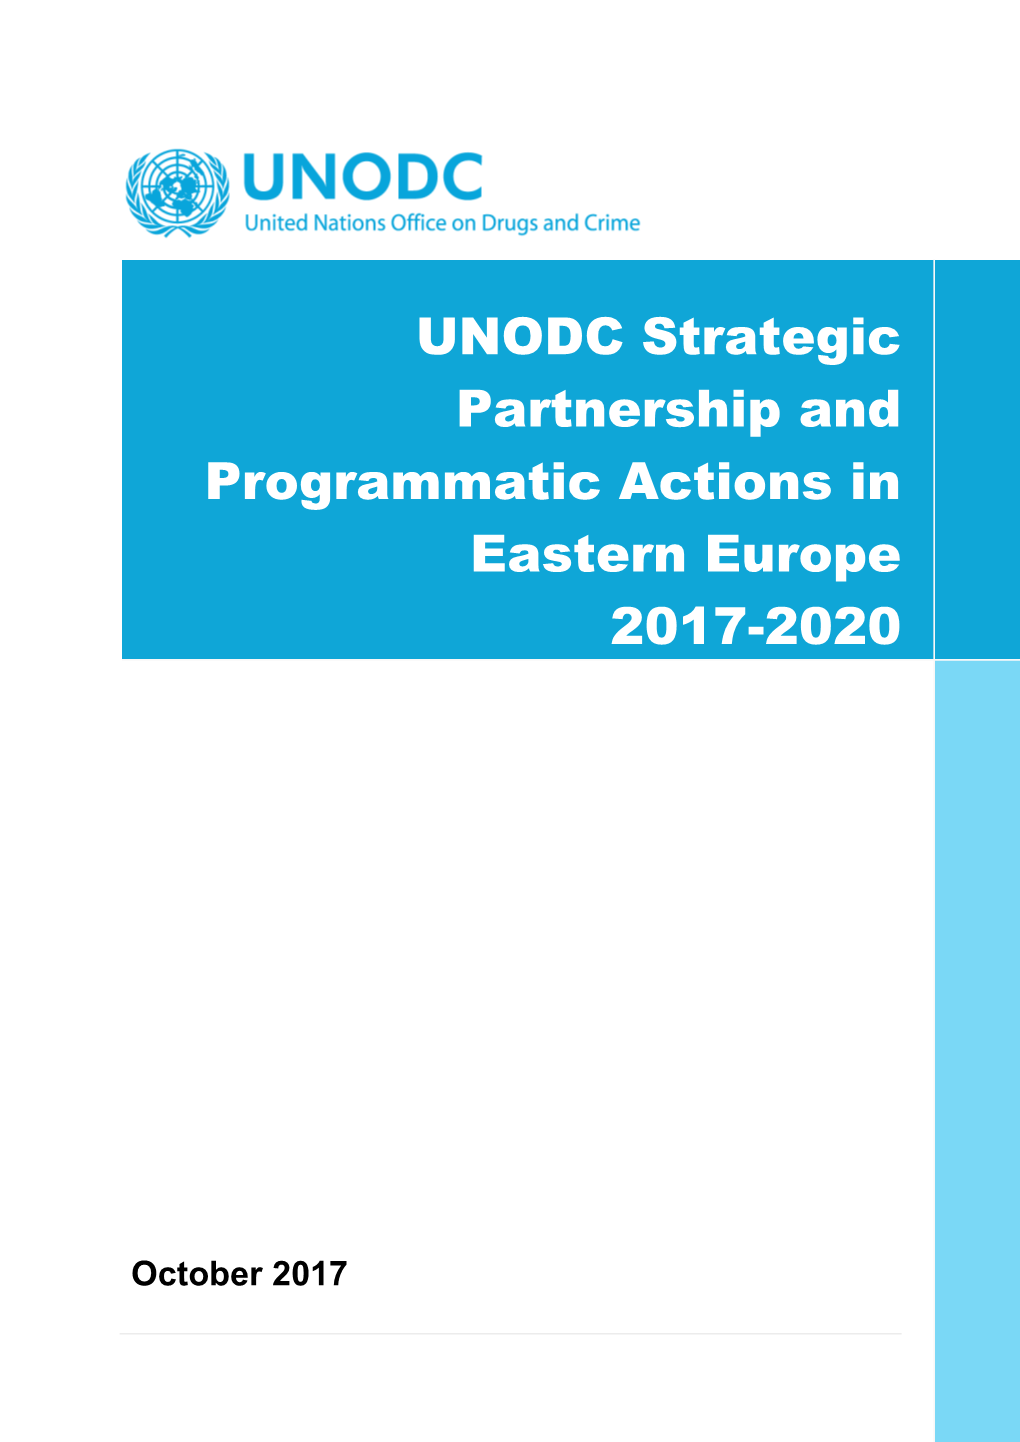 UNODC Strategic Partnership and Programmatic Actions in Eastern Europe 2017-2020